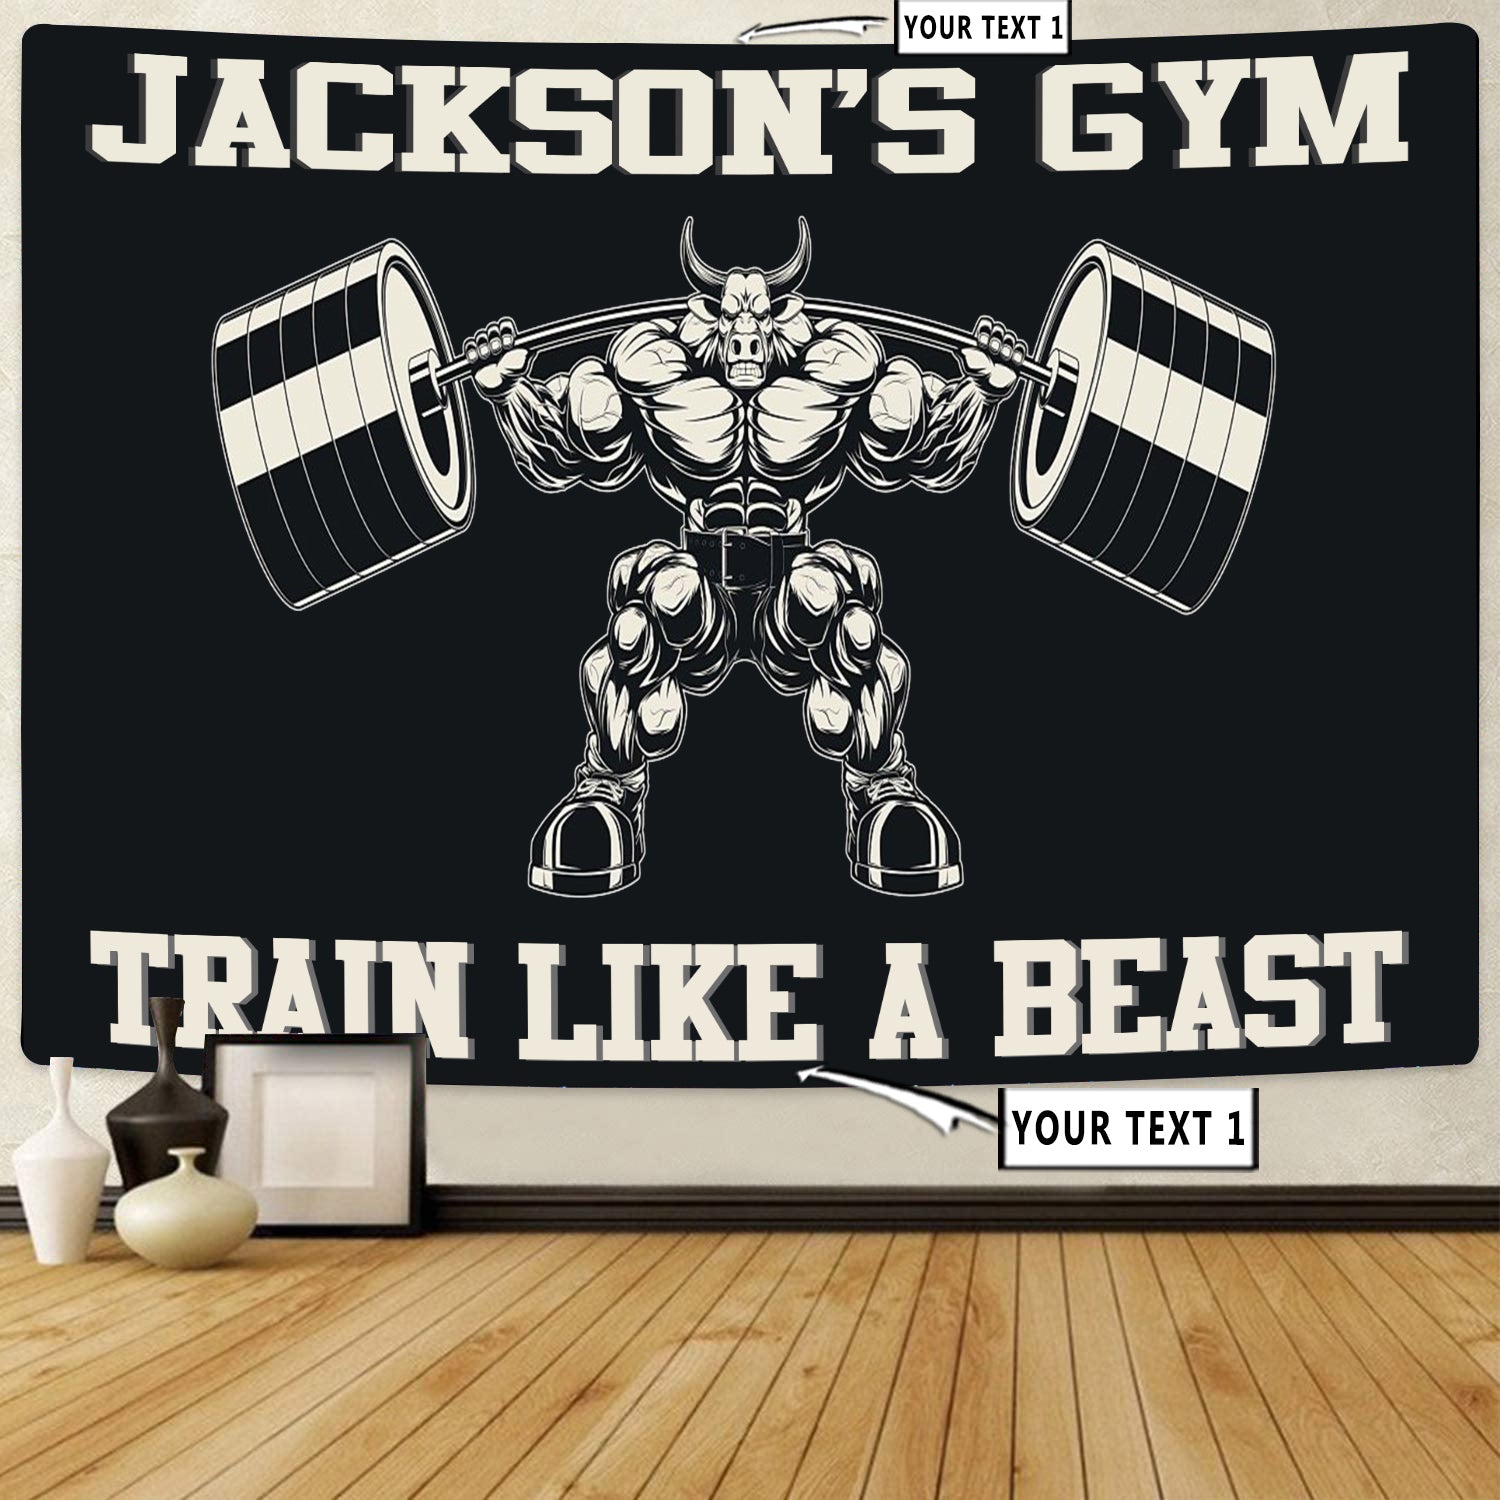 Personalized Home Gym Decor Train Like A Beast Wall Banner Flag Tapestry